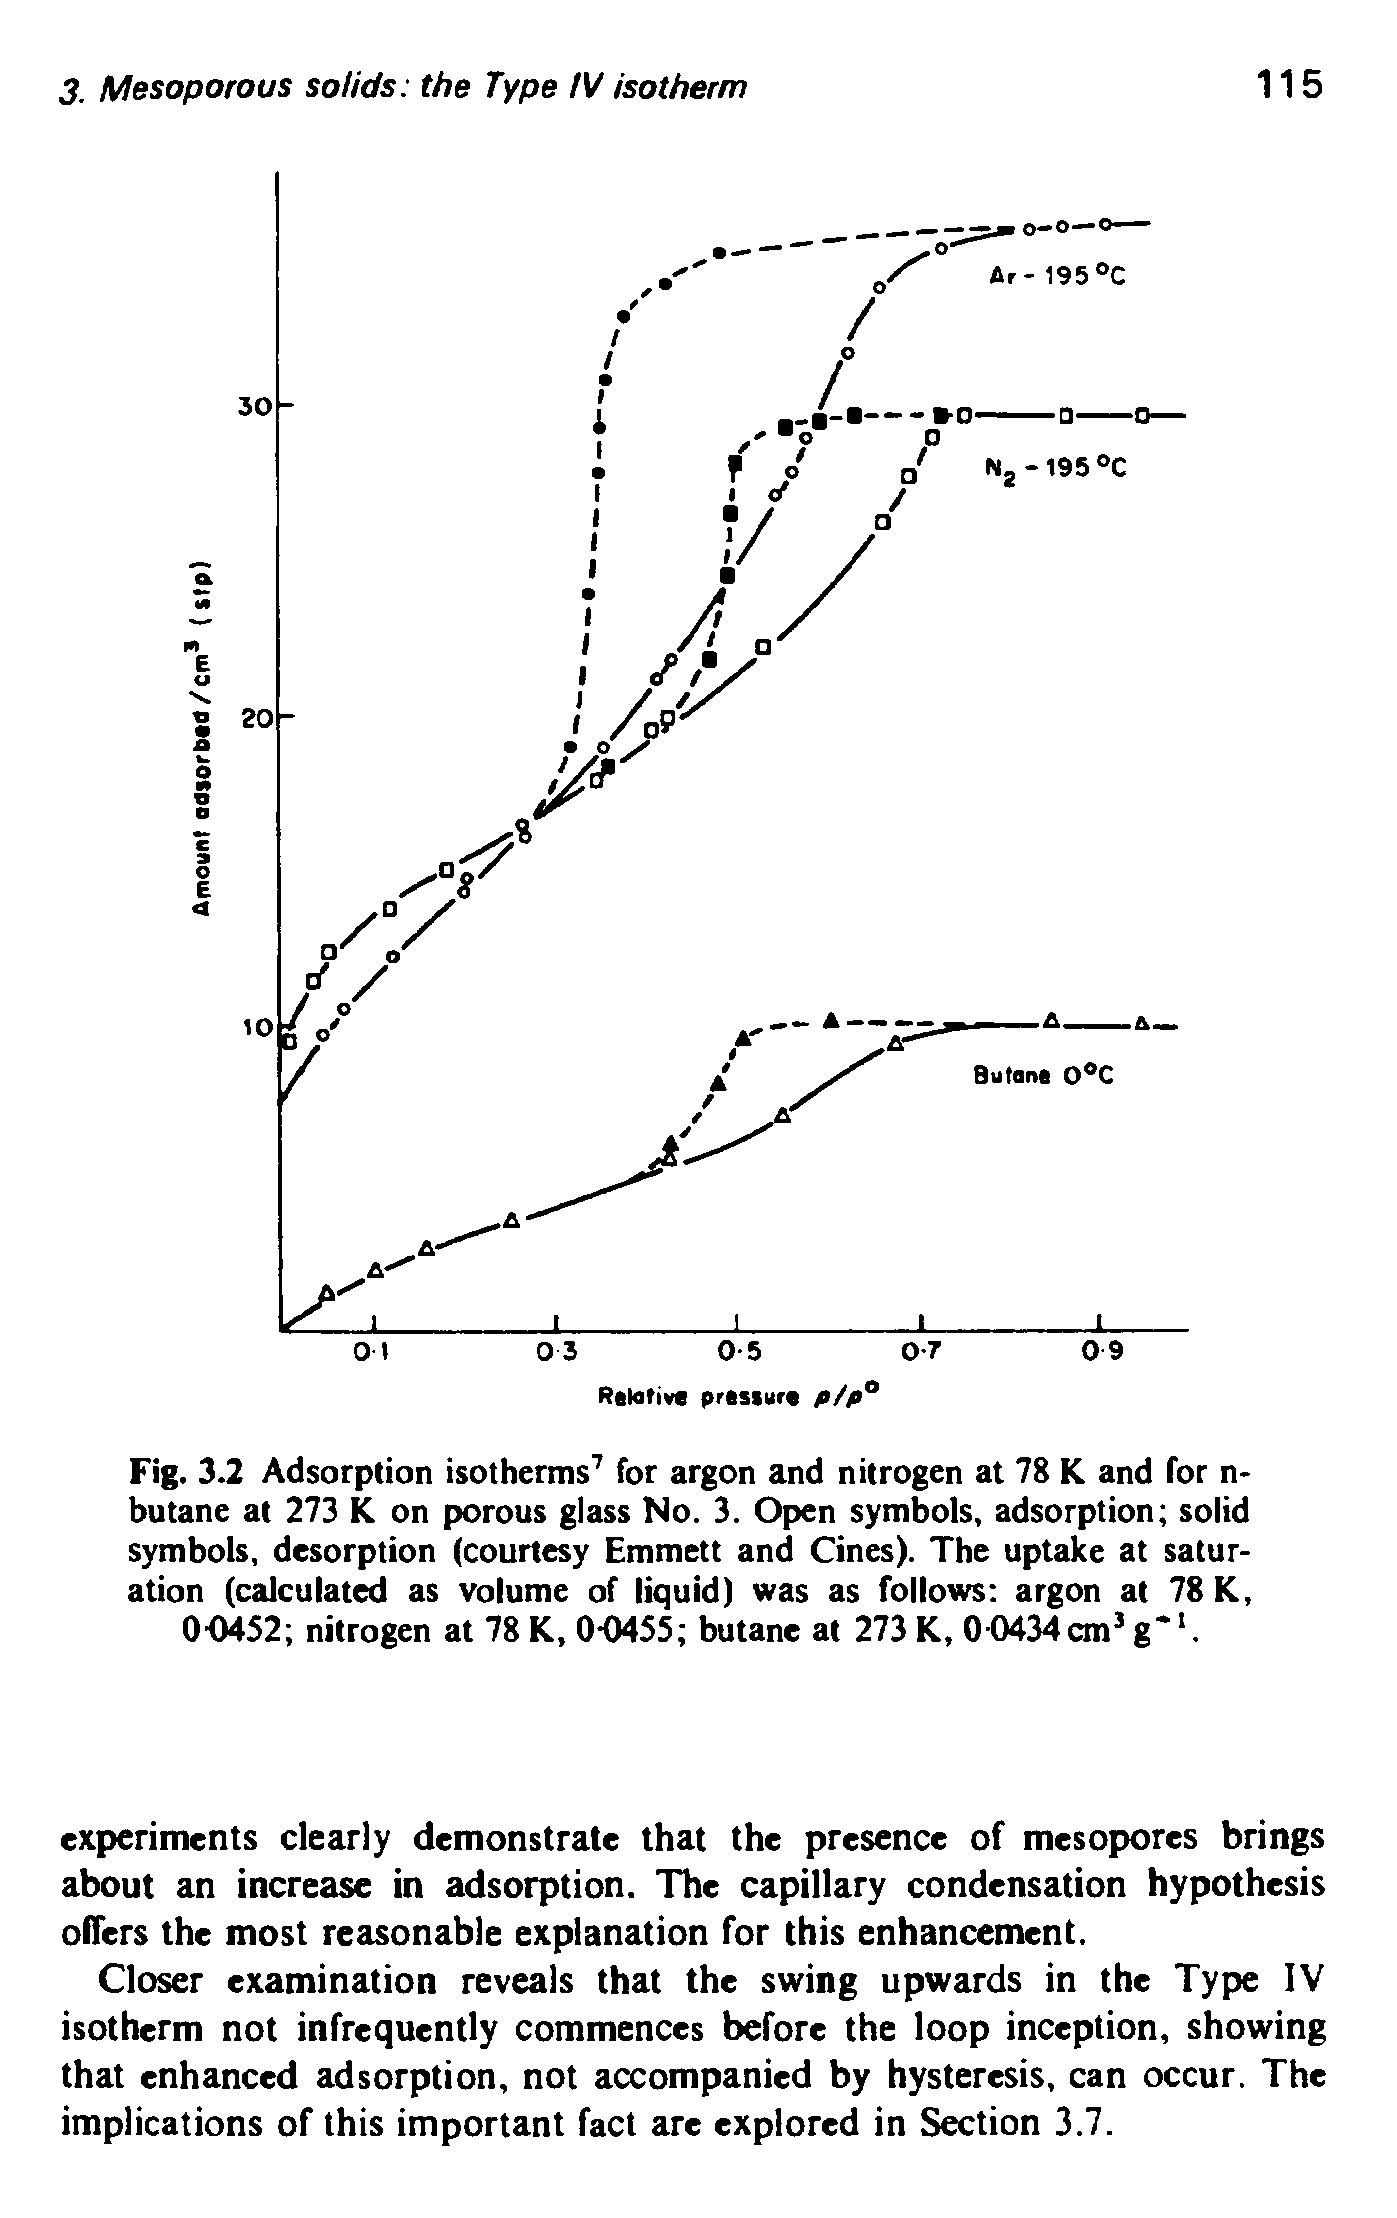 Fig. 3.2 Adsorption isotherms for argon and nitrogen at 78 K and for n-butane at 273 K on porous glass No. 3. Open symbols, adsorption solid symbols, desorption (courtesy Emmett and Cines). The uptake at saturation (calculate as volume of liquid) was as follows argon at 78 K, 00452 nitrogen at 78 K, 00455 butane at 273 K, 00434cm g .